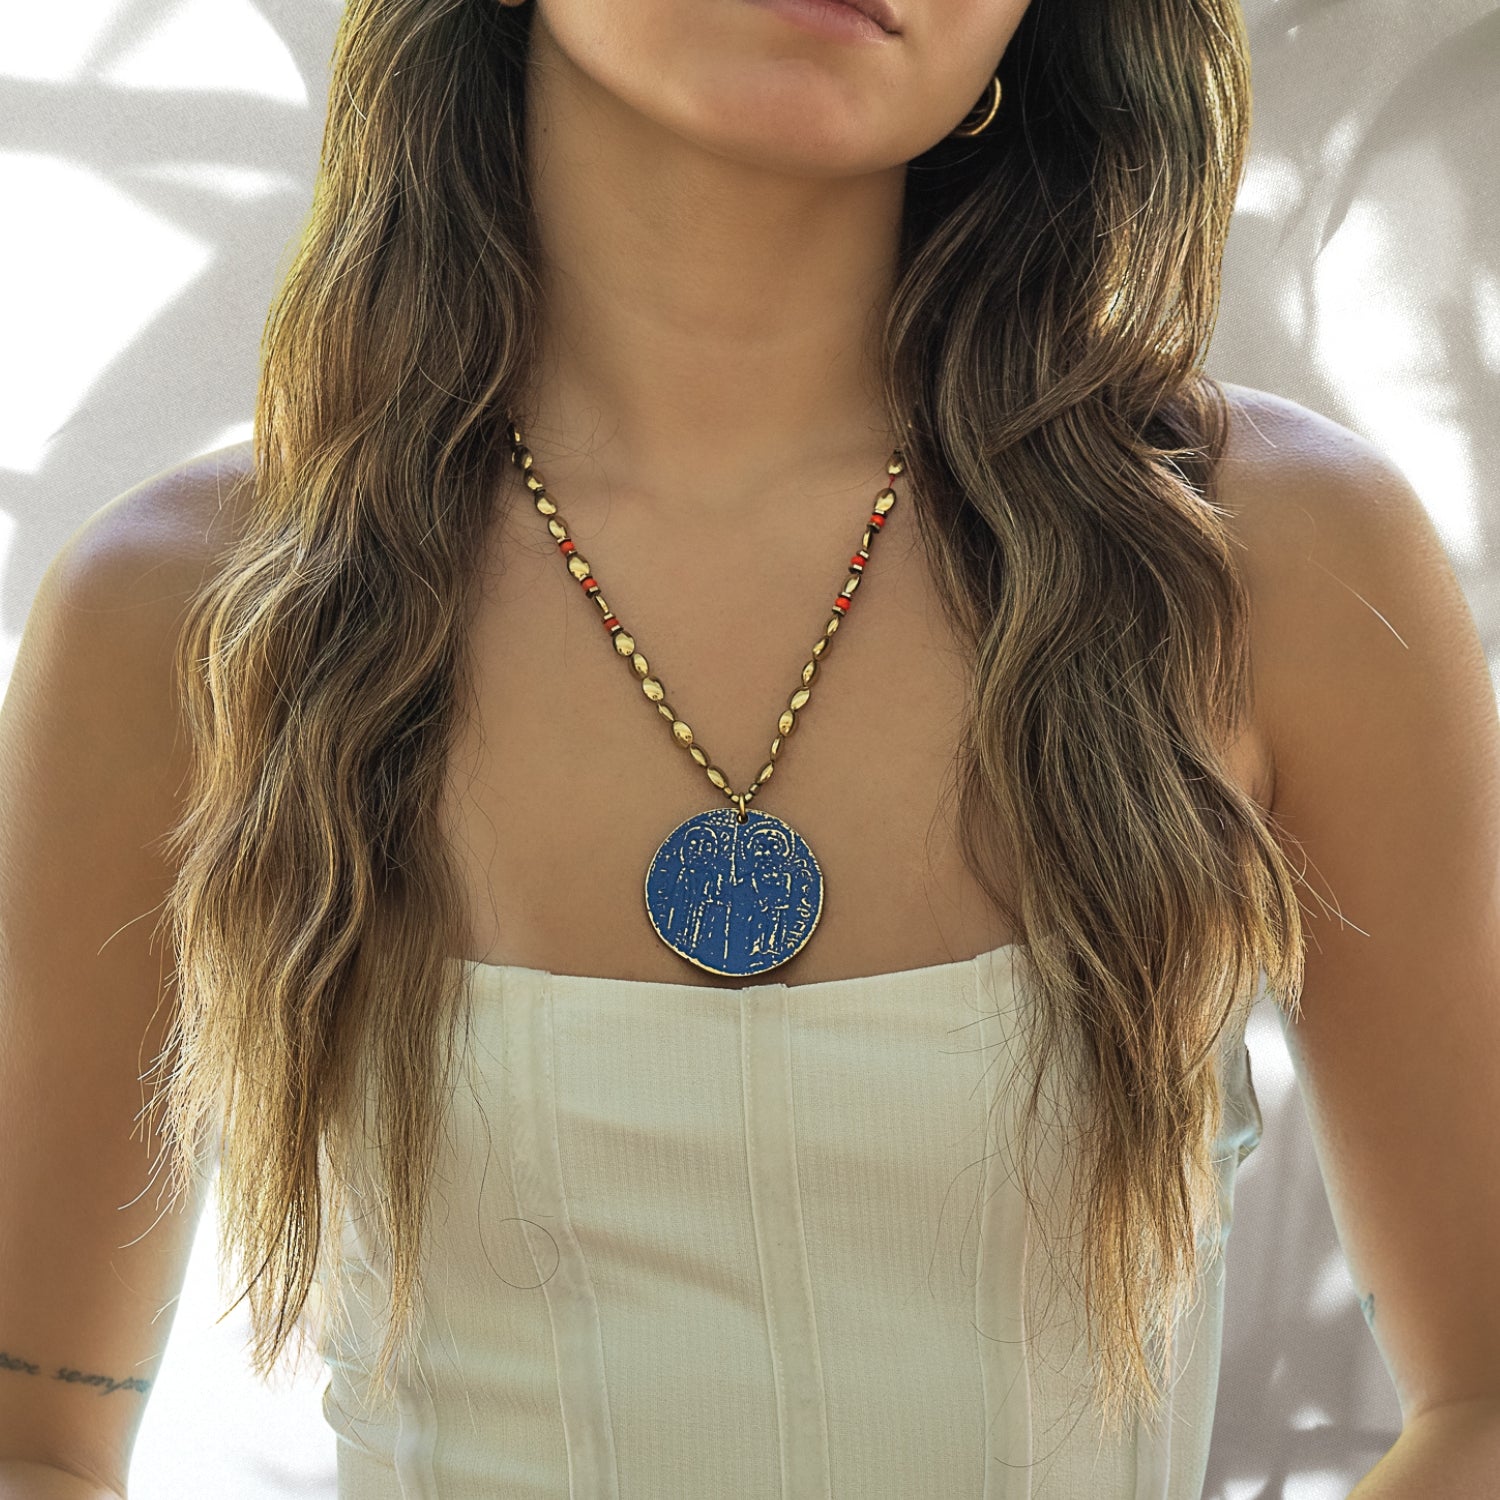 The Powerful Protection Talisman Necklace beautifully adorning the neck of the model